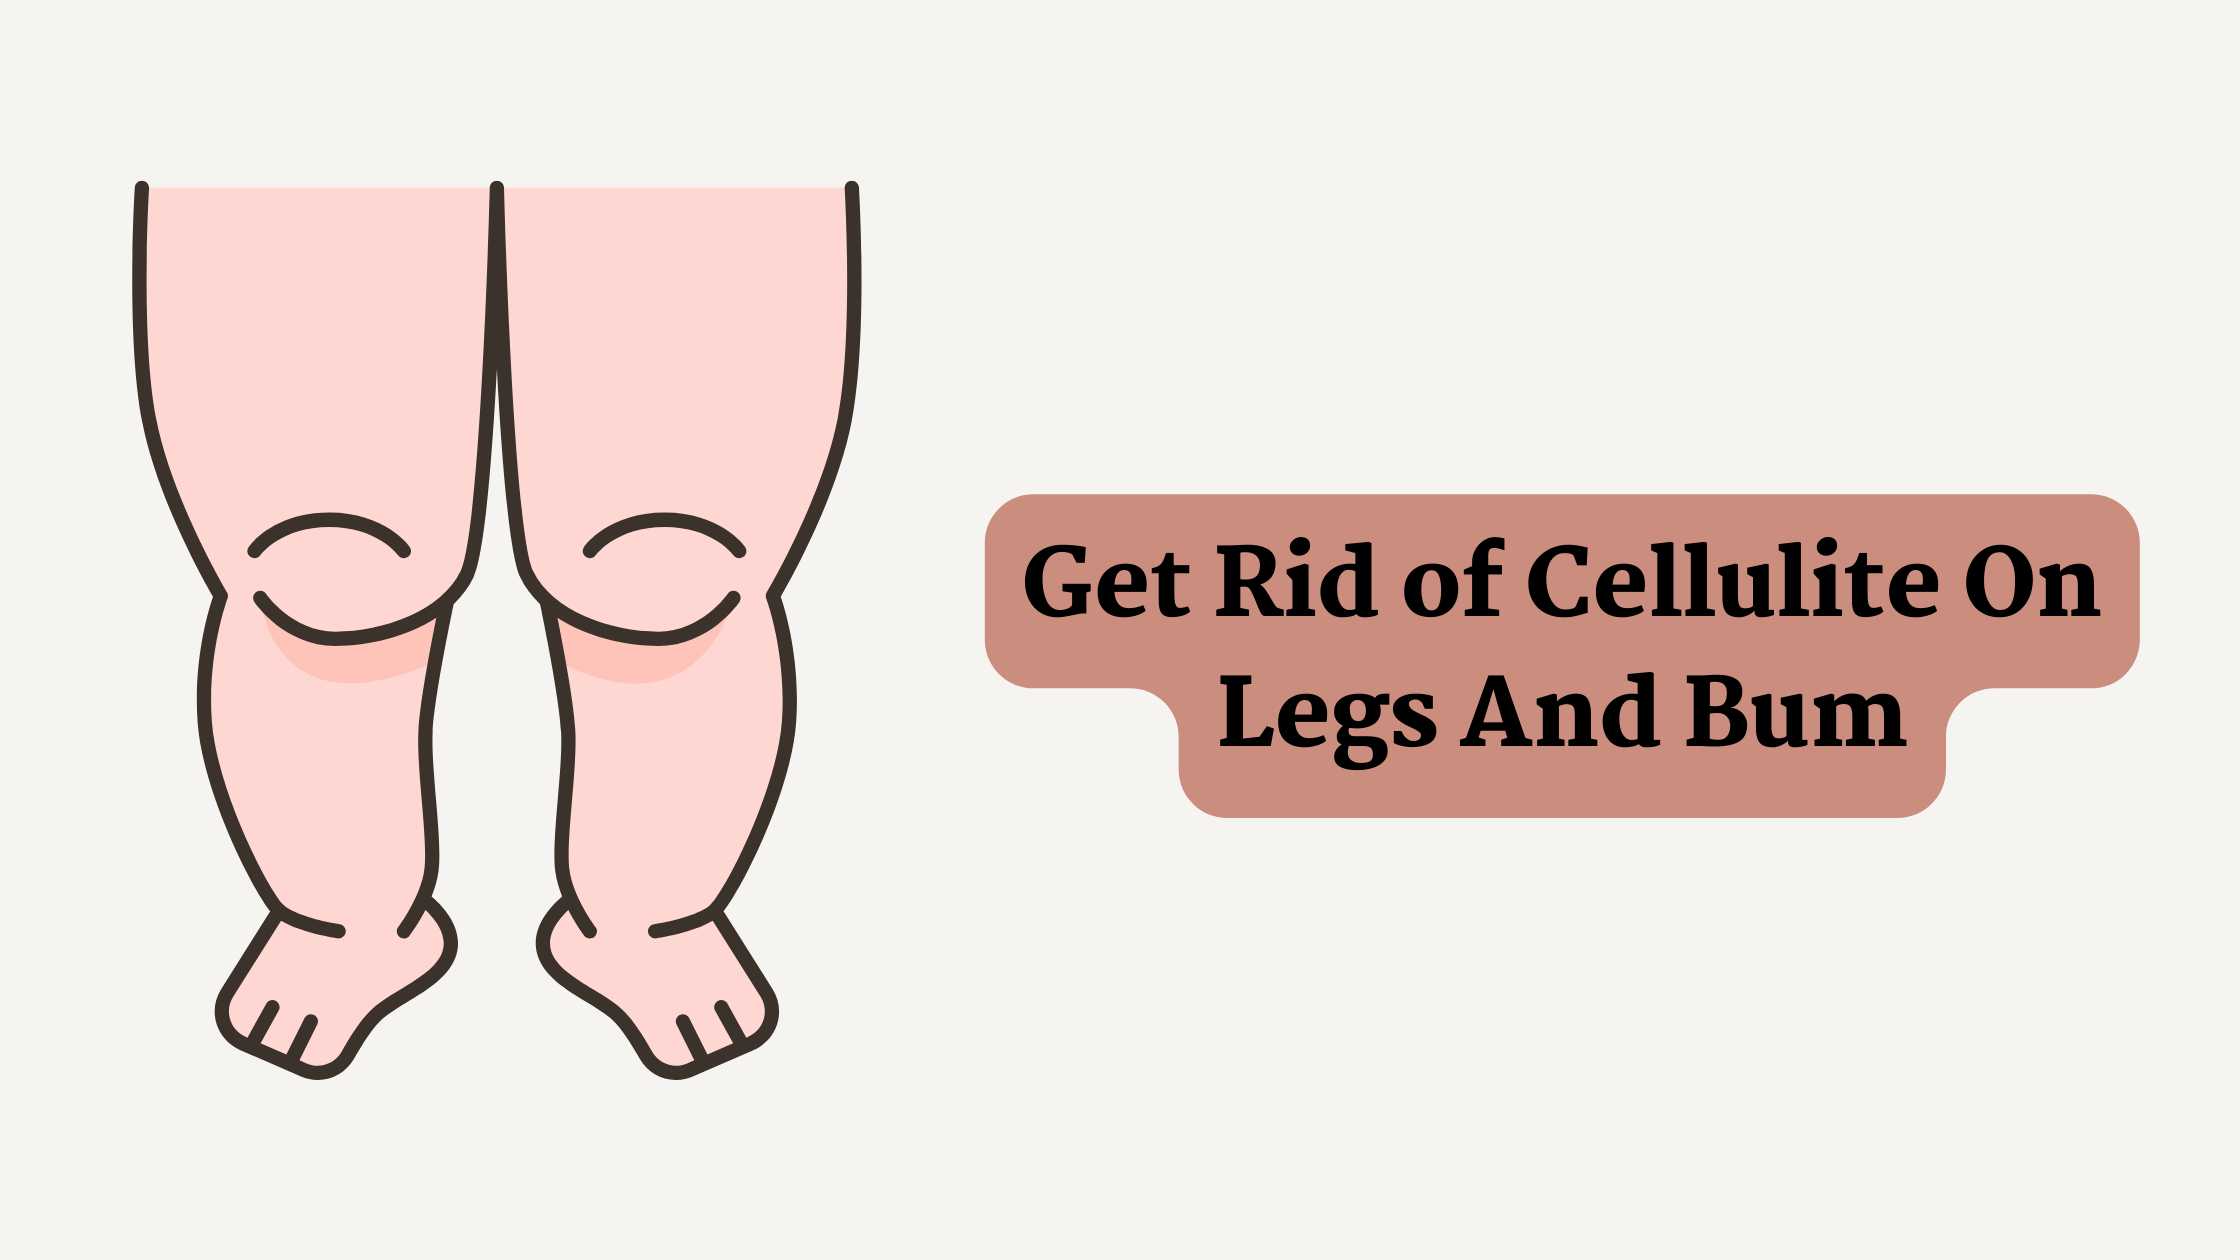 How To Get Rid of Cellulite On Legs And Bum?